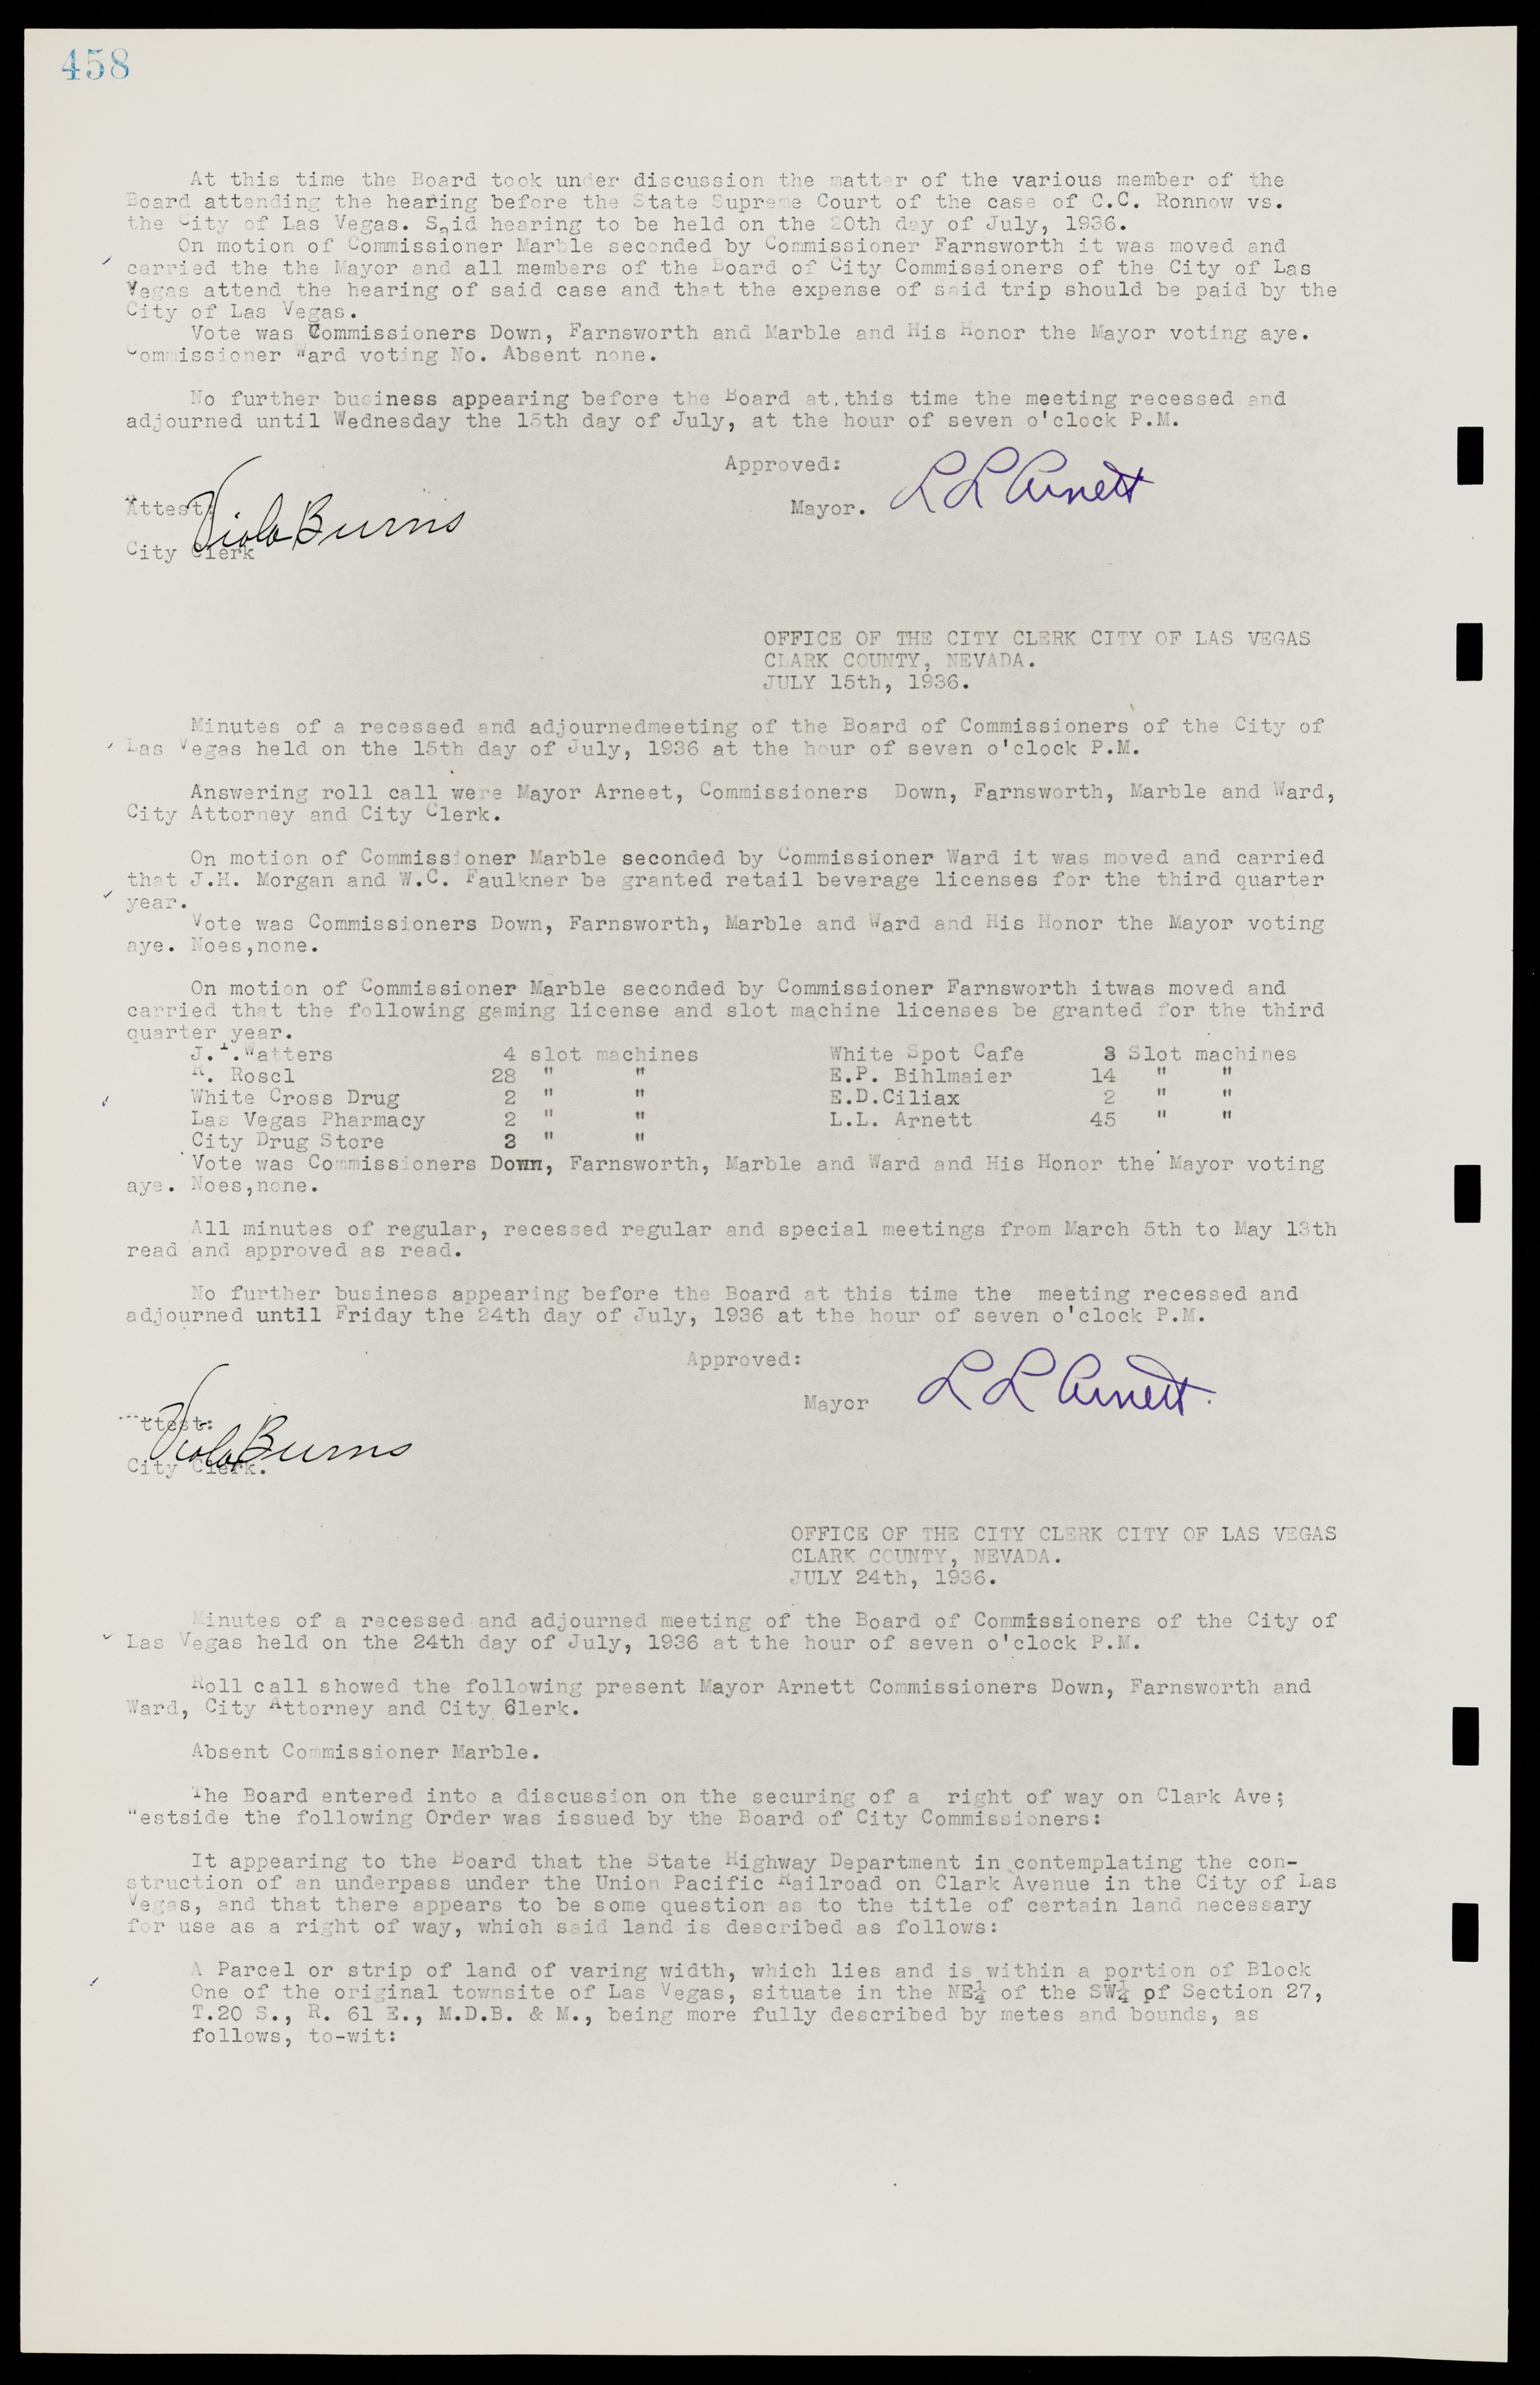 Las Vegas City Commission Minutes, May 14, 1929 to February 11, 1937, lvc000003-465